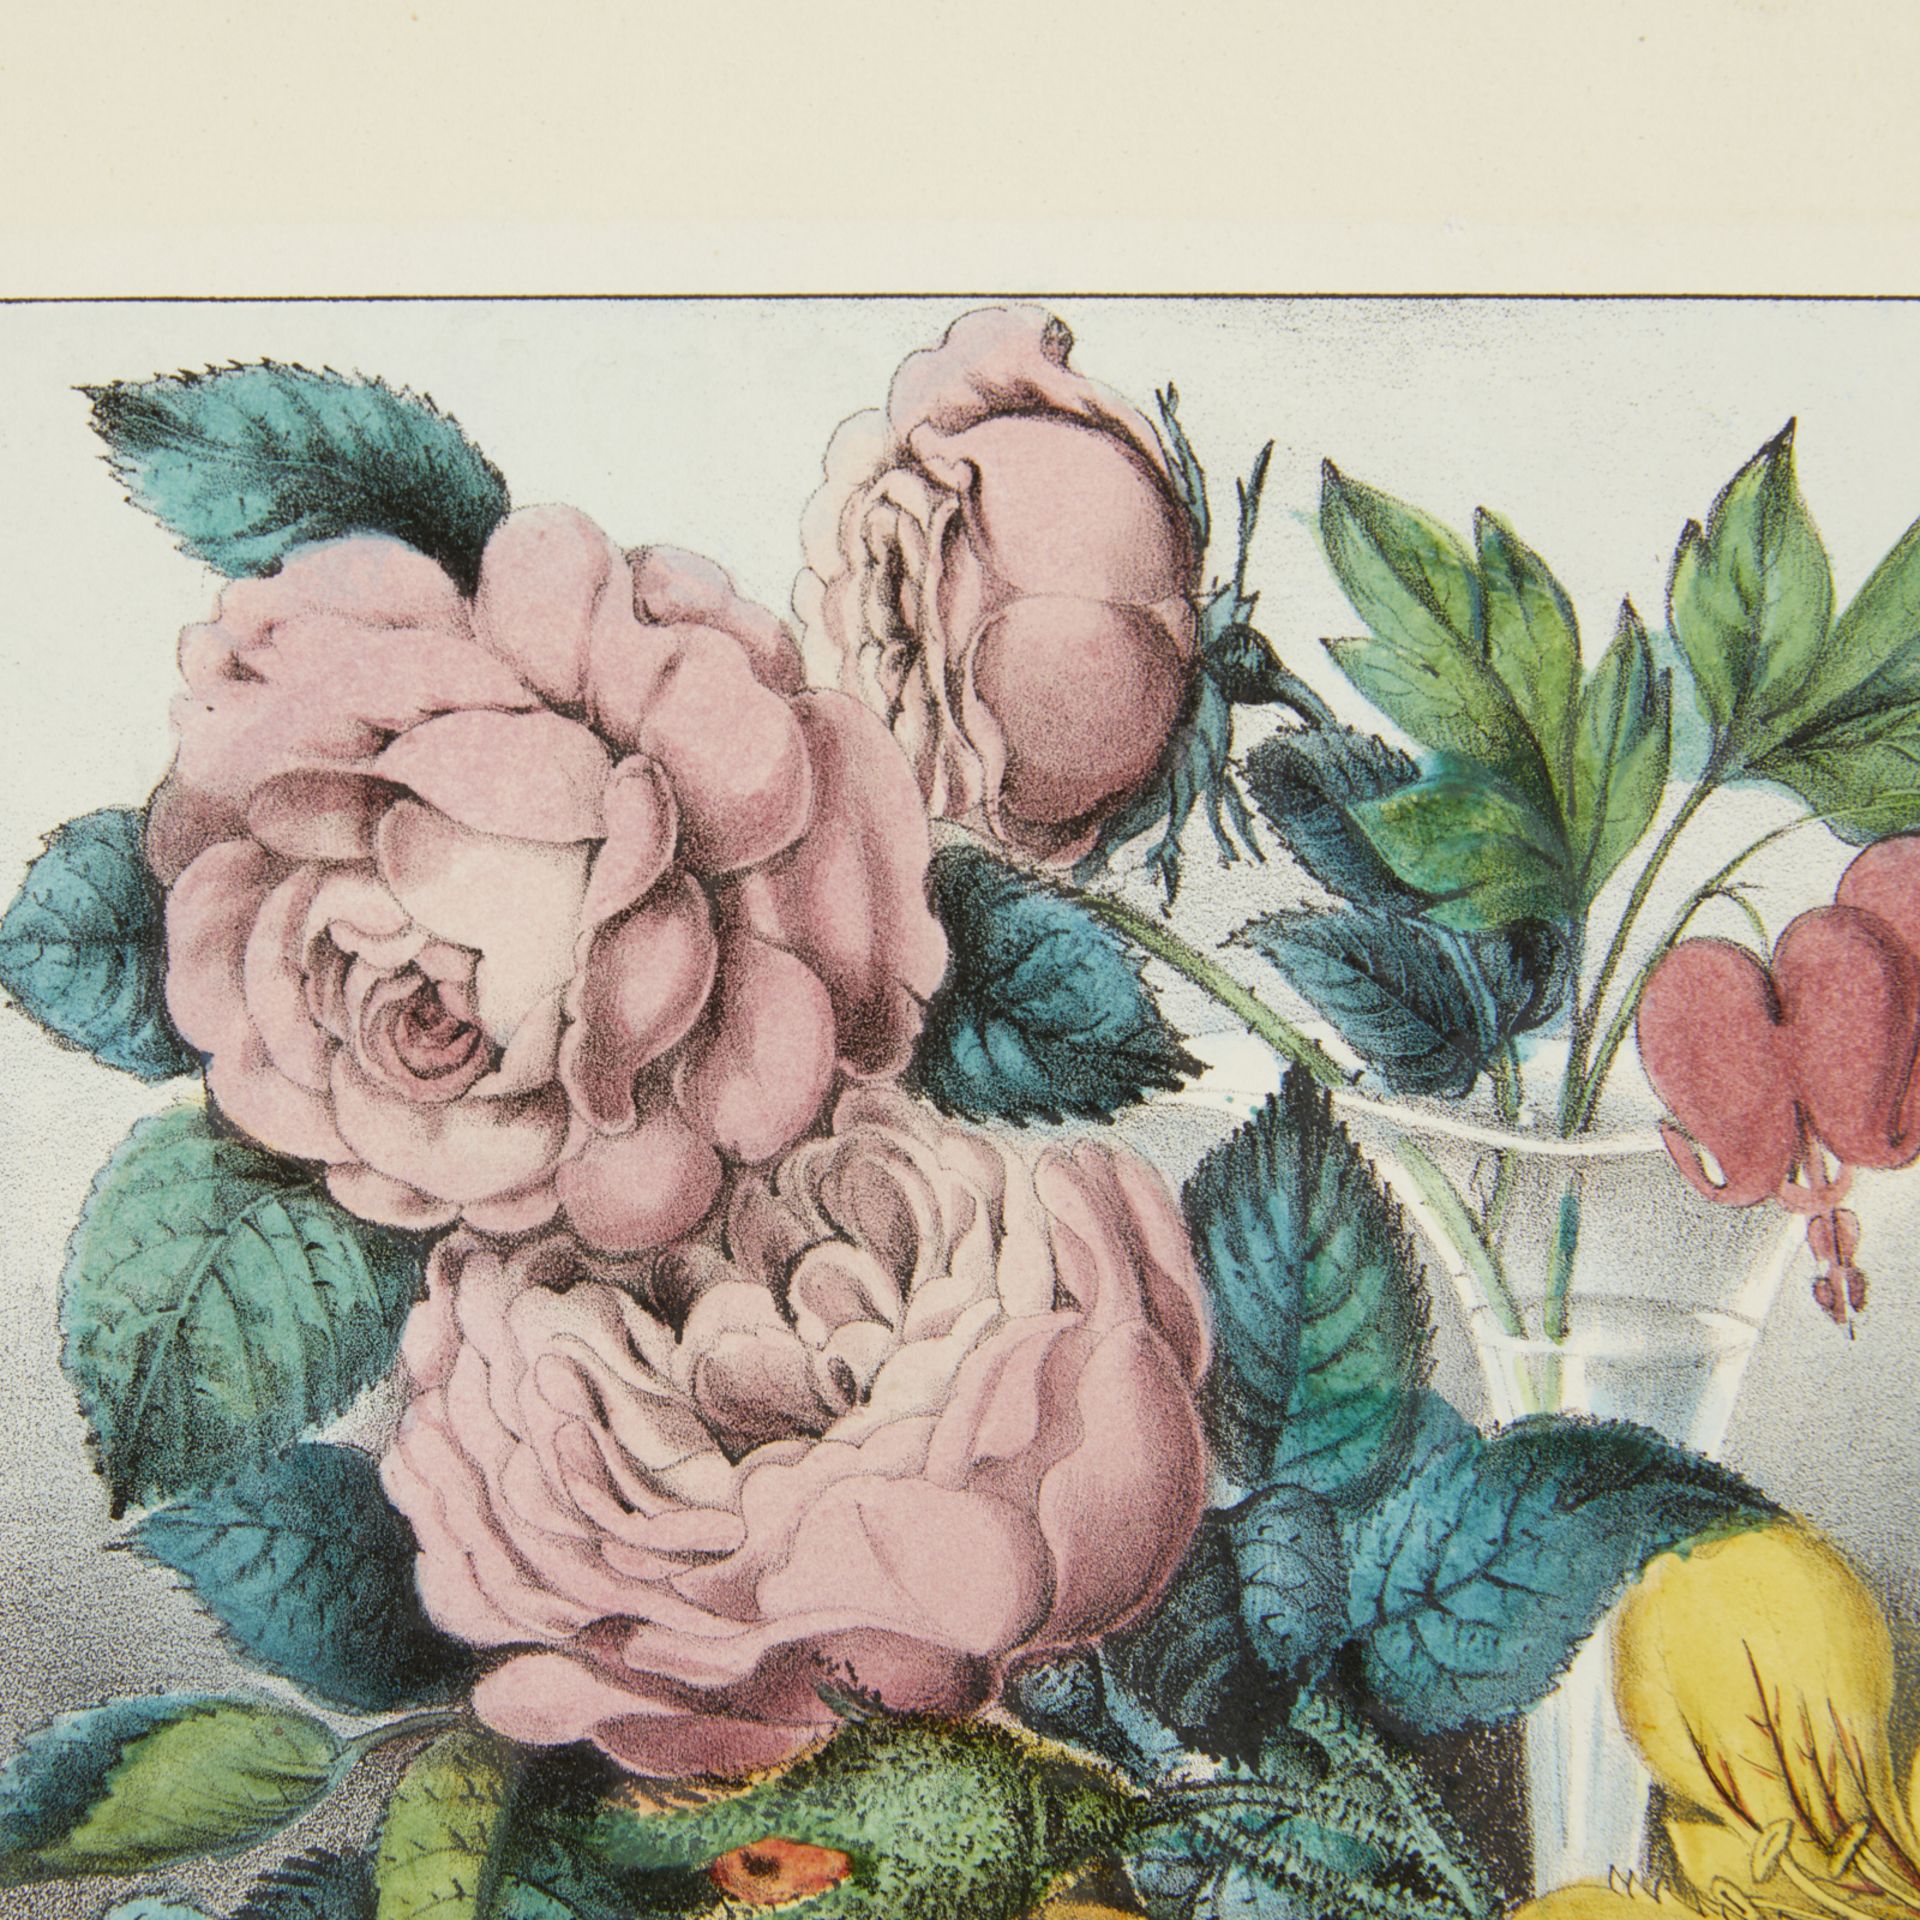 Currier & Ives "Fruit & Flowers" Print 1870 - Image 7 of 8